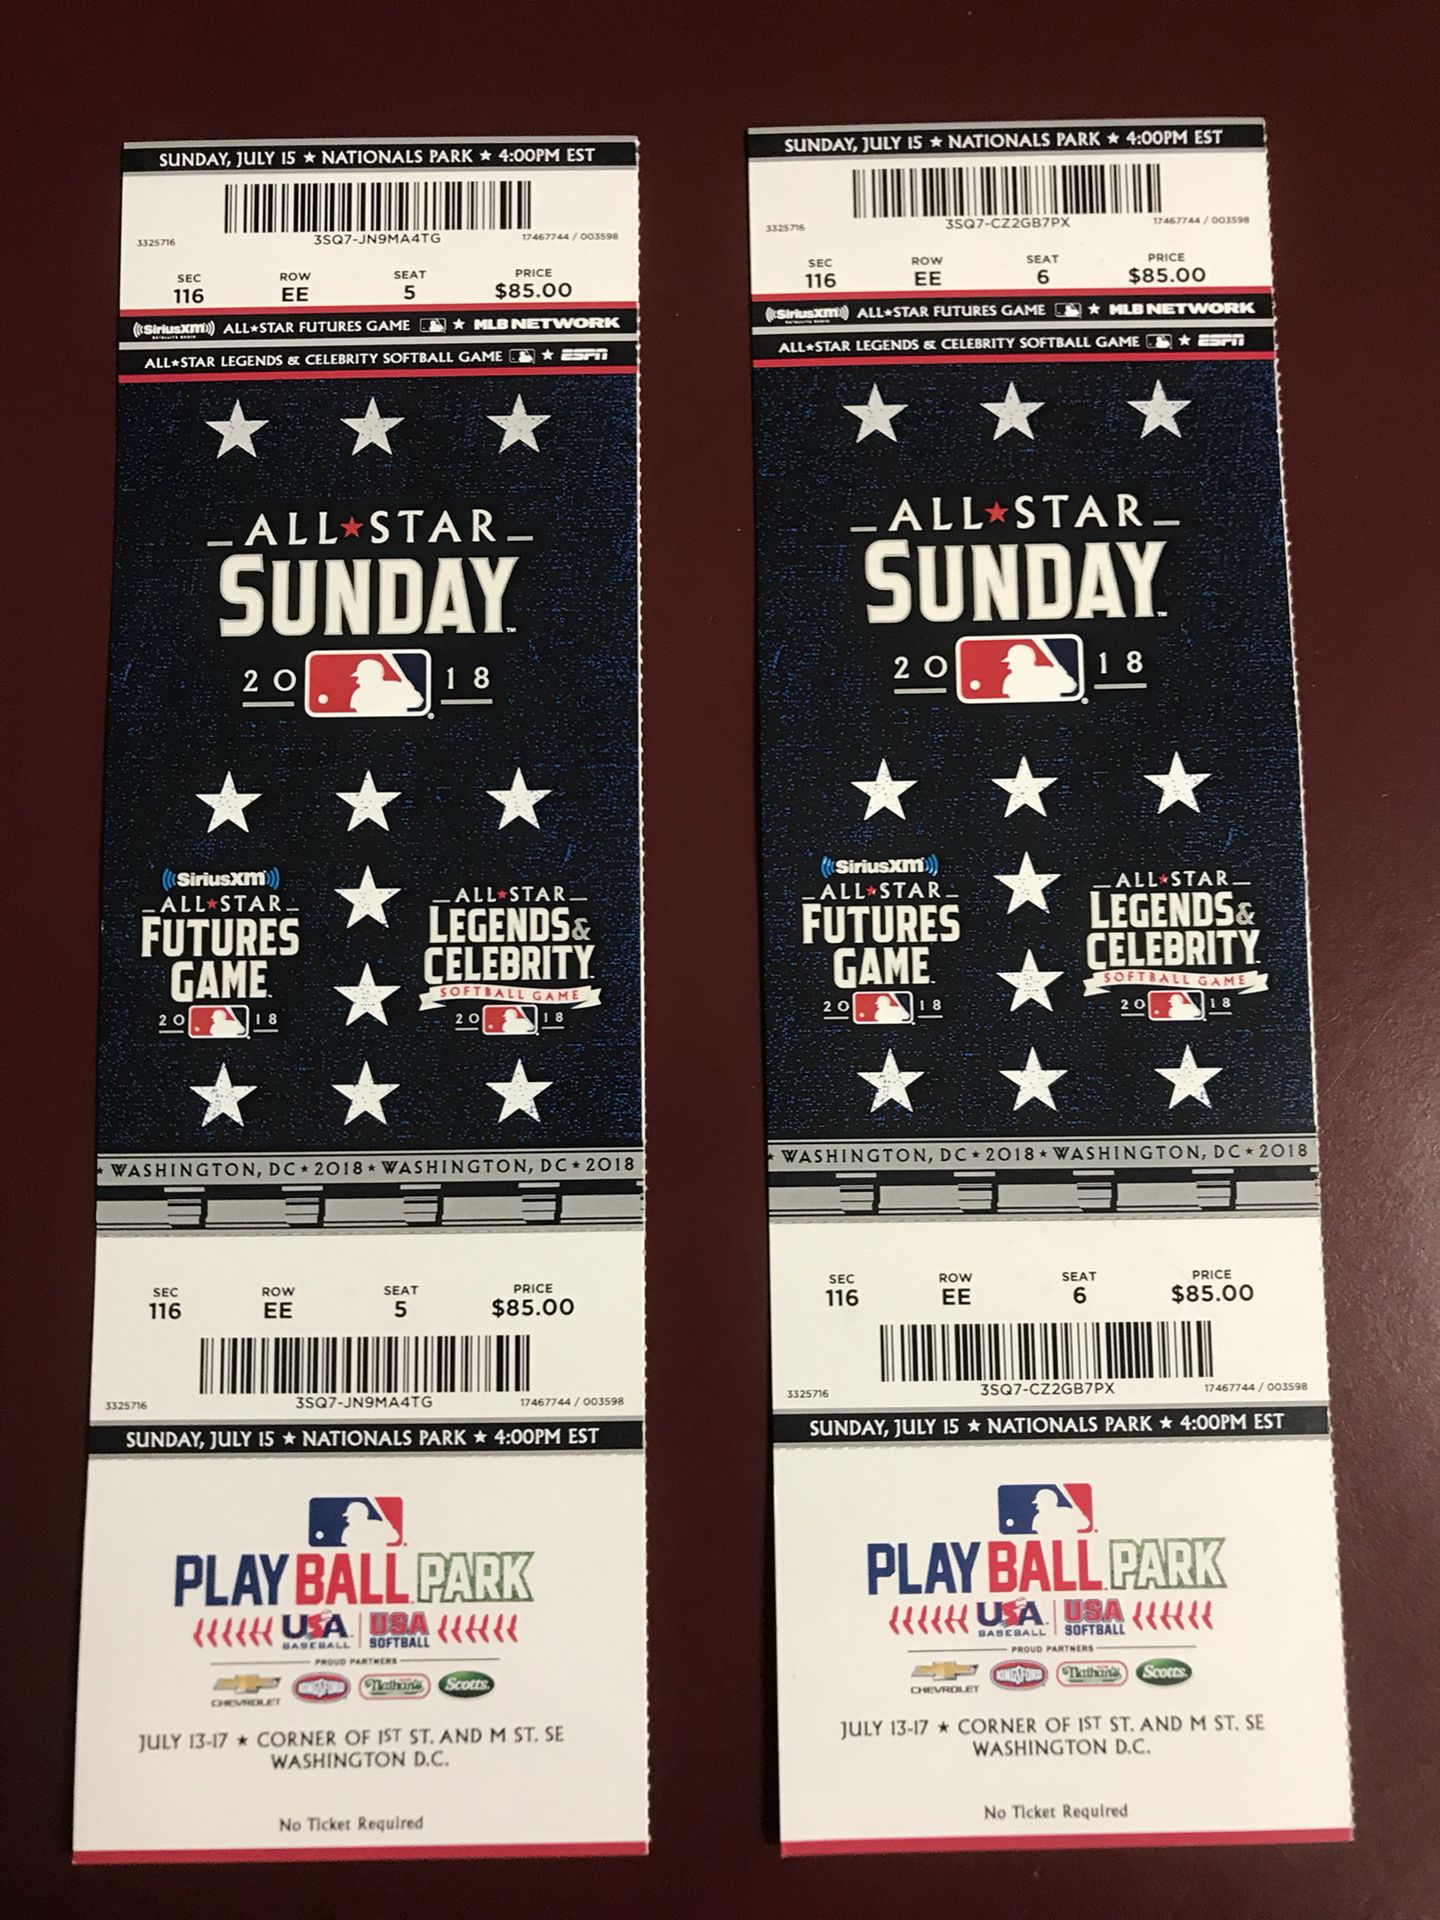 MLB All Star Weekend: Sunday 7/15 Games